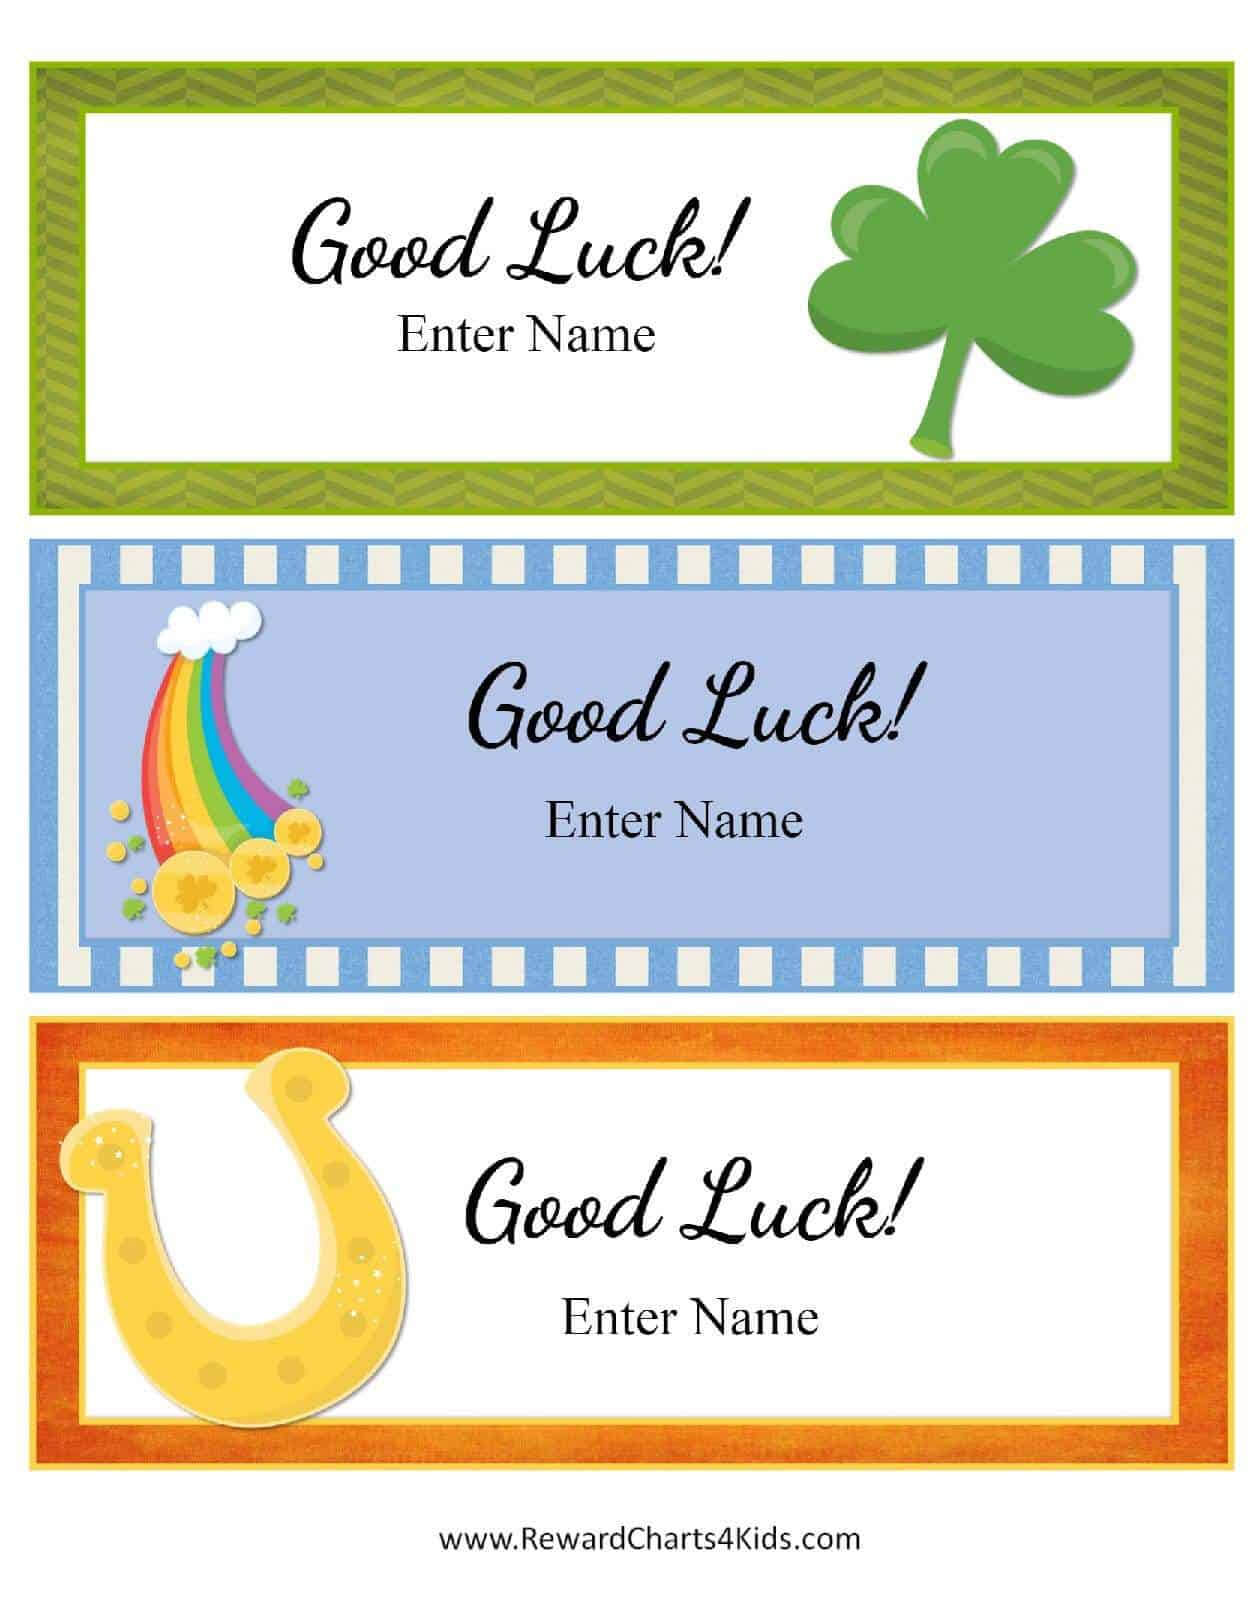 Free Good Luck Cards For Kids | Customize Online & Print At Home With Good Luck Card Templates